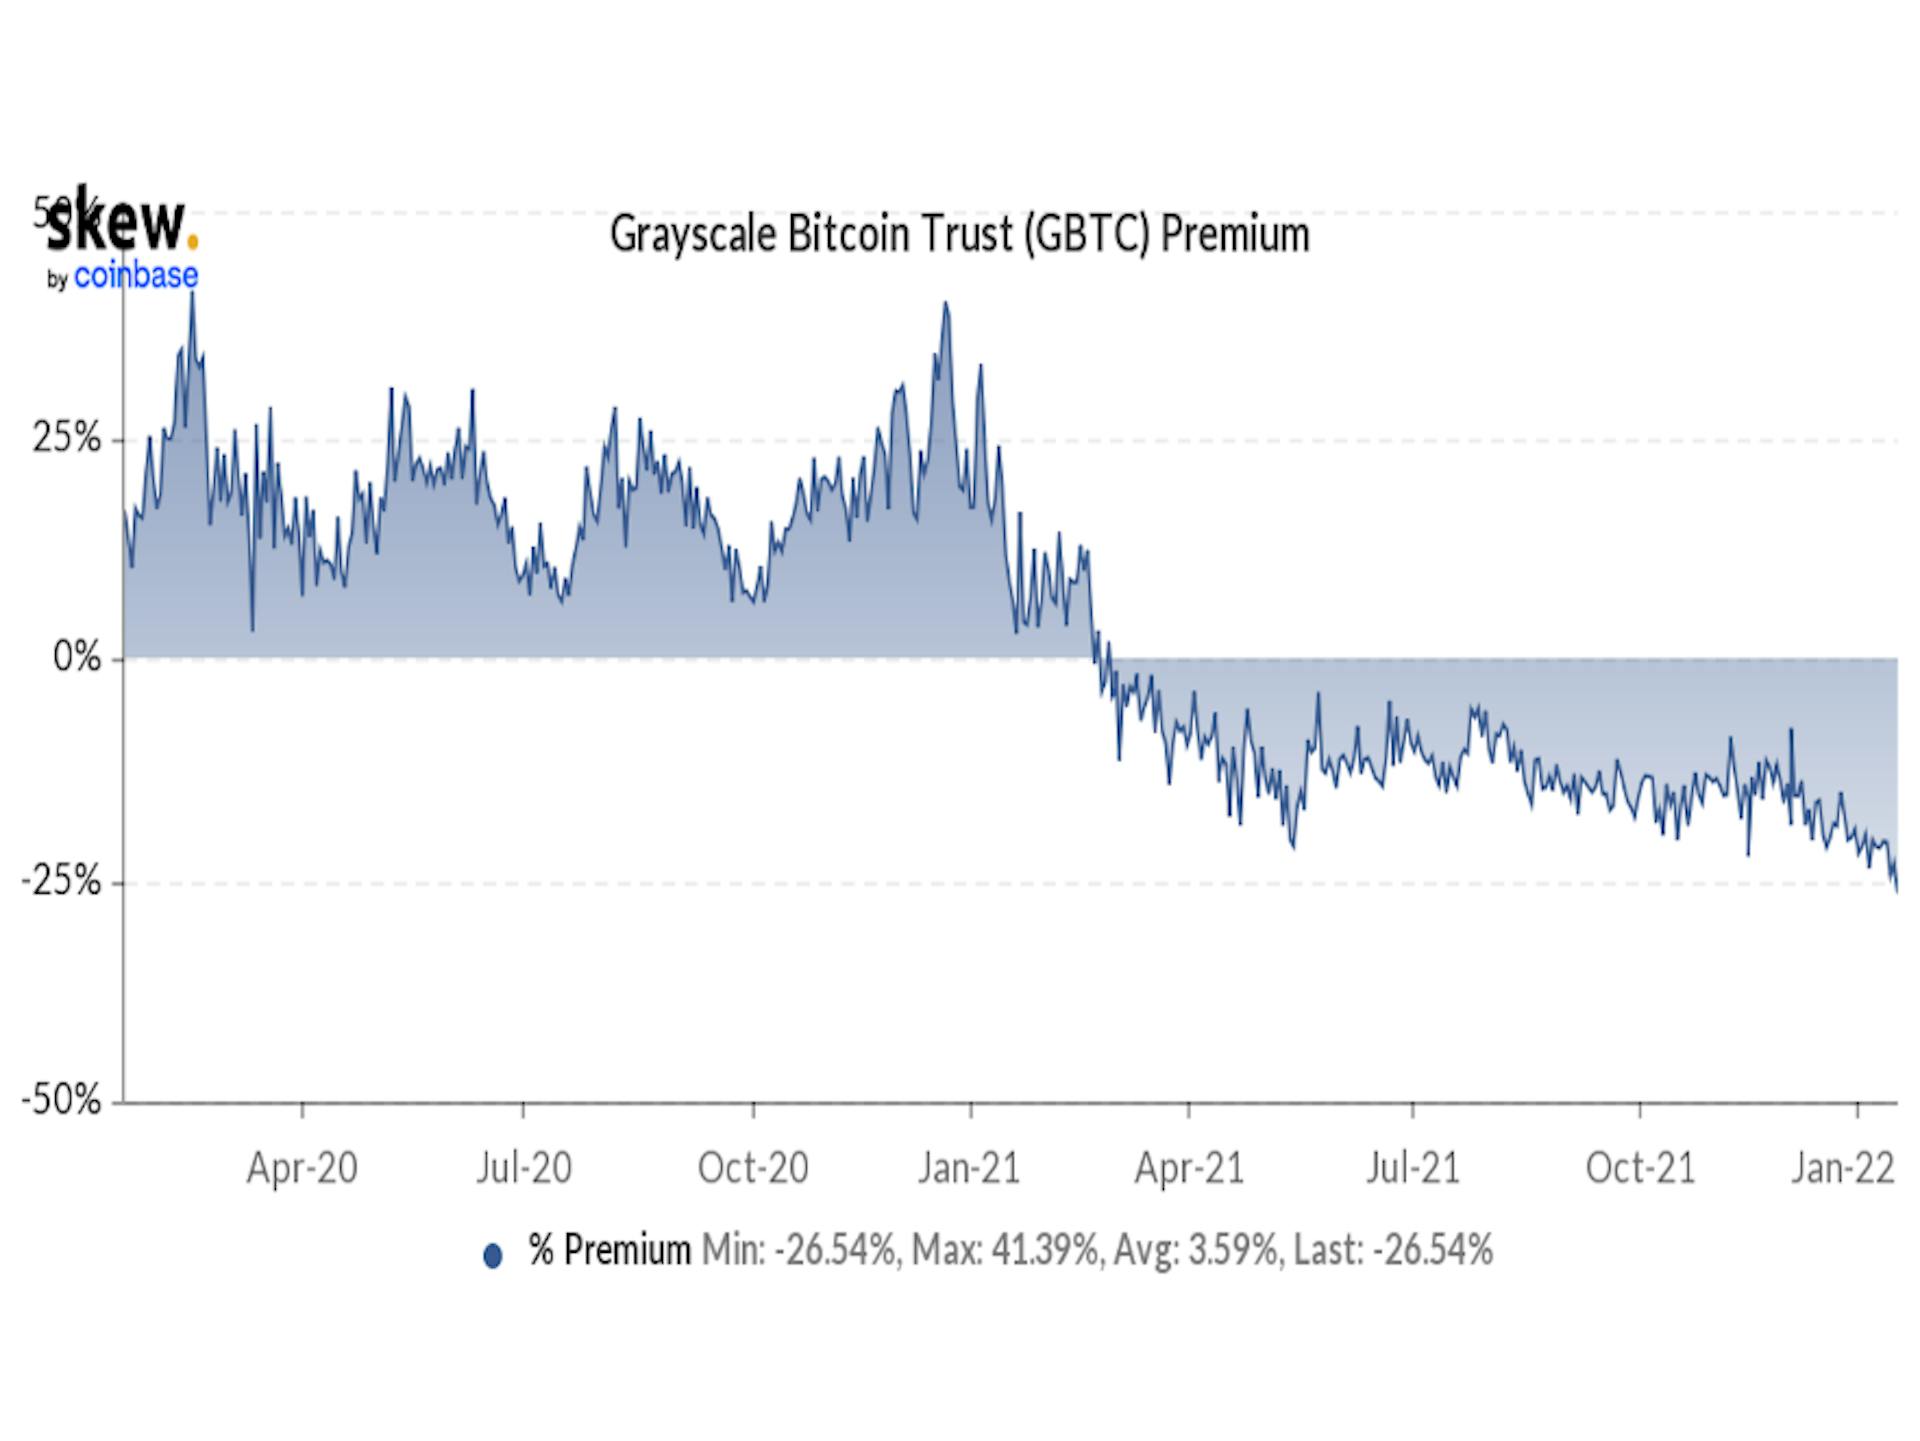 Grayscale Bitcoin Trust Discount Hits Record Low at 26.5%